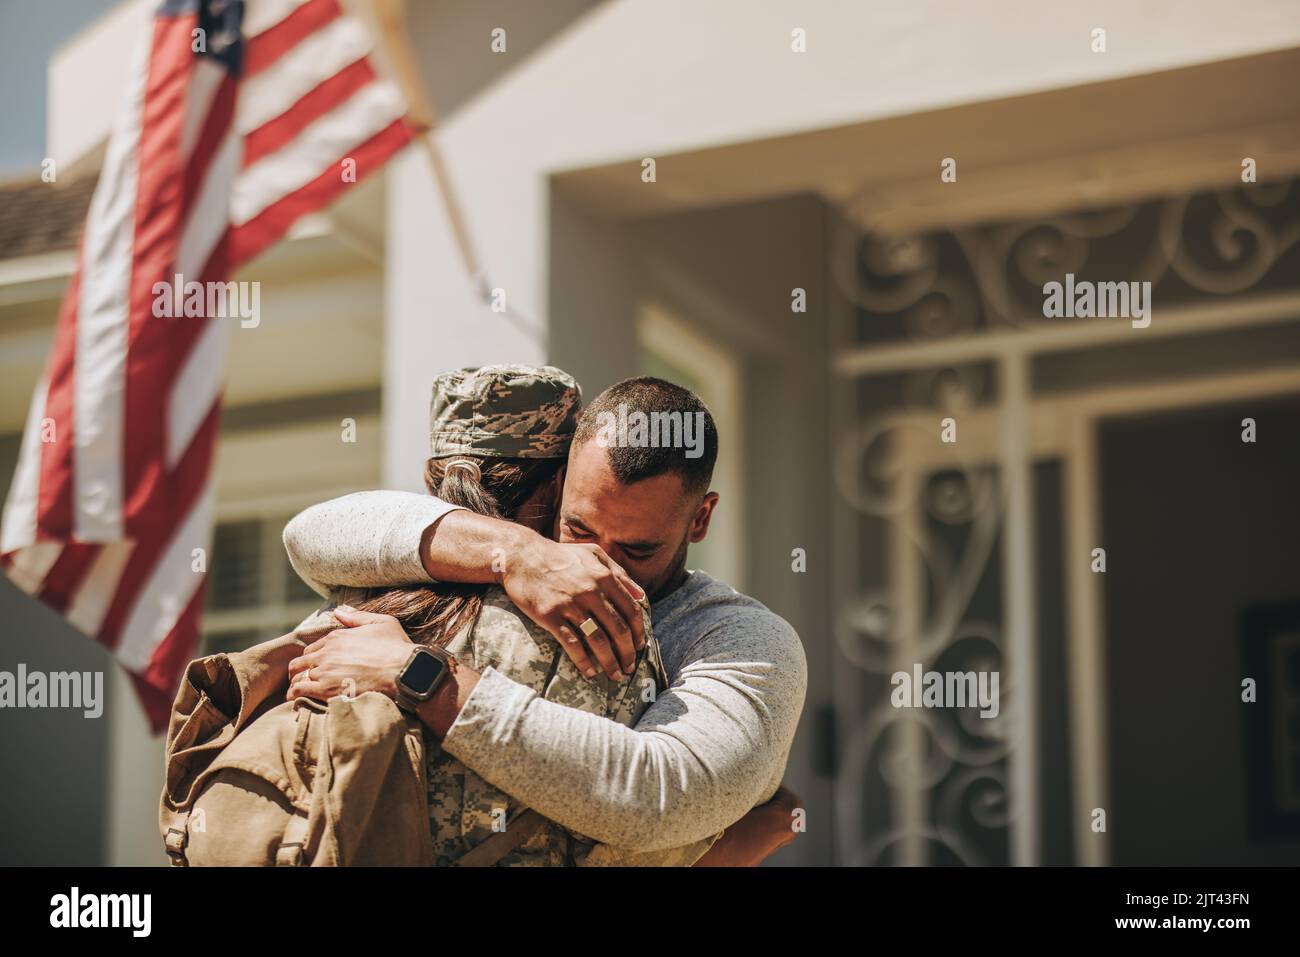 Emotional military homecoming. Female soldier embracing her husband after returning home from the army. American servicewoman reuniting with her husba Stock Photo